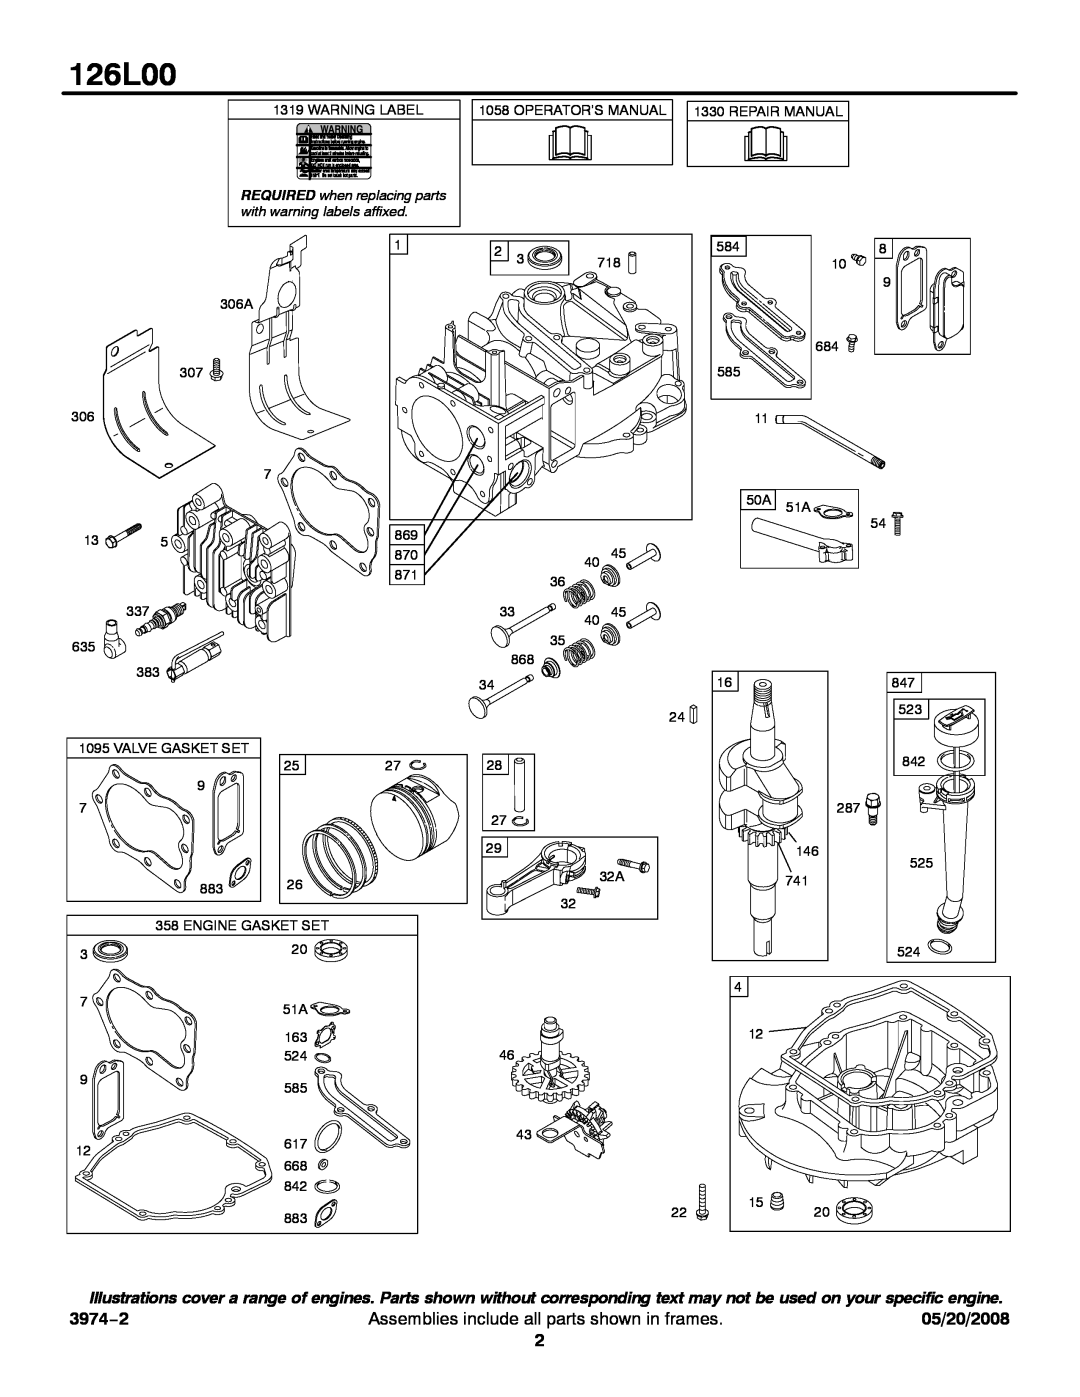 Snapper 126L00 service manual 3974−2, Assemblies include all parts shown in frames, 05/20/2008 